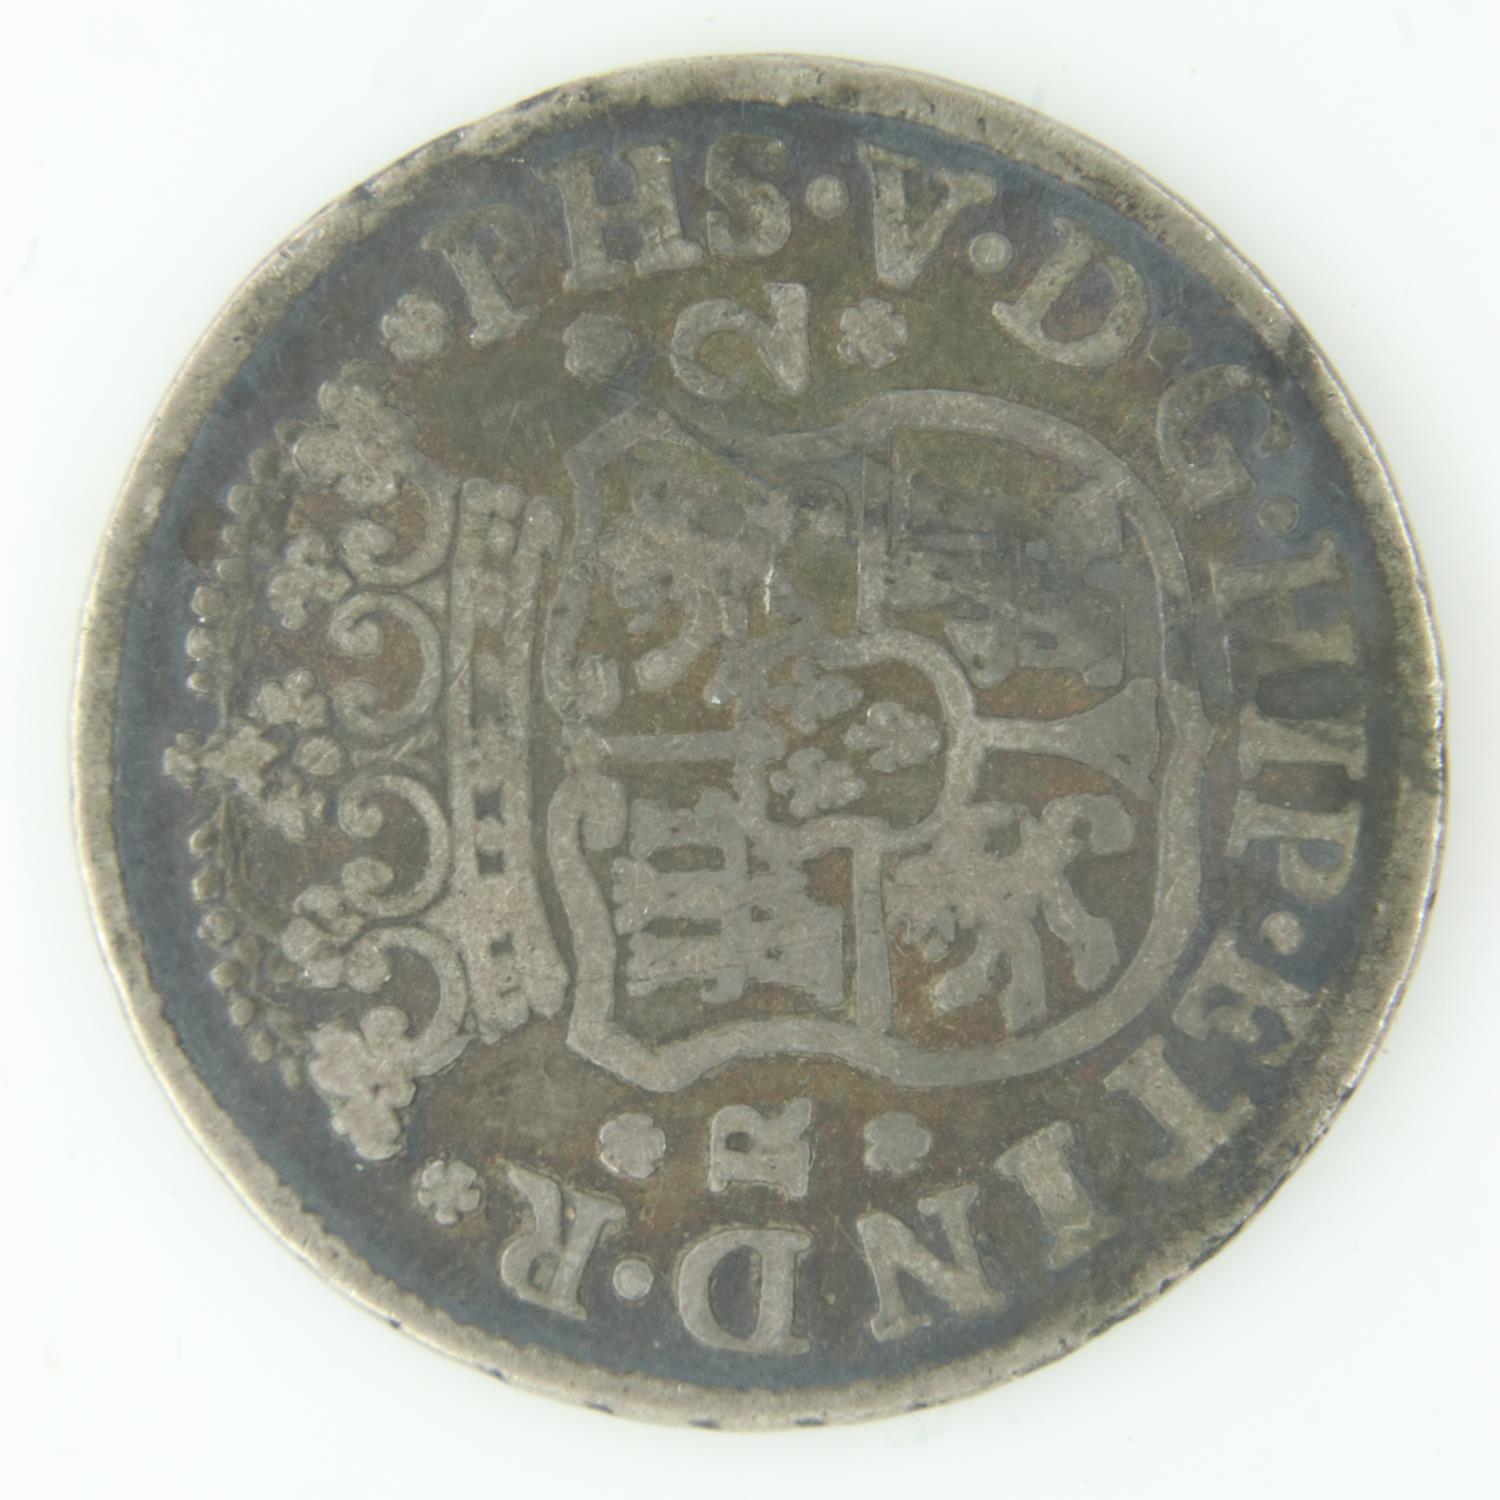 1745 Spanish silver 2 Reales - gF grade. UK P&P Group 0 (£6+VAT for the first lot and £1+VAT for - Image 2 of 2